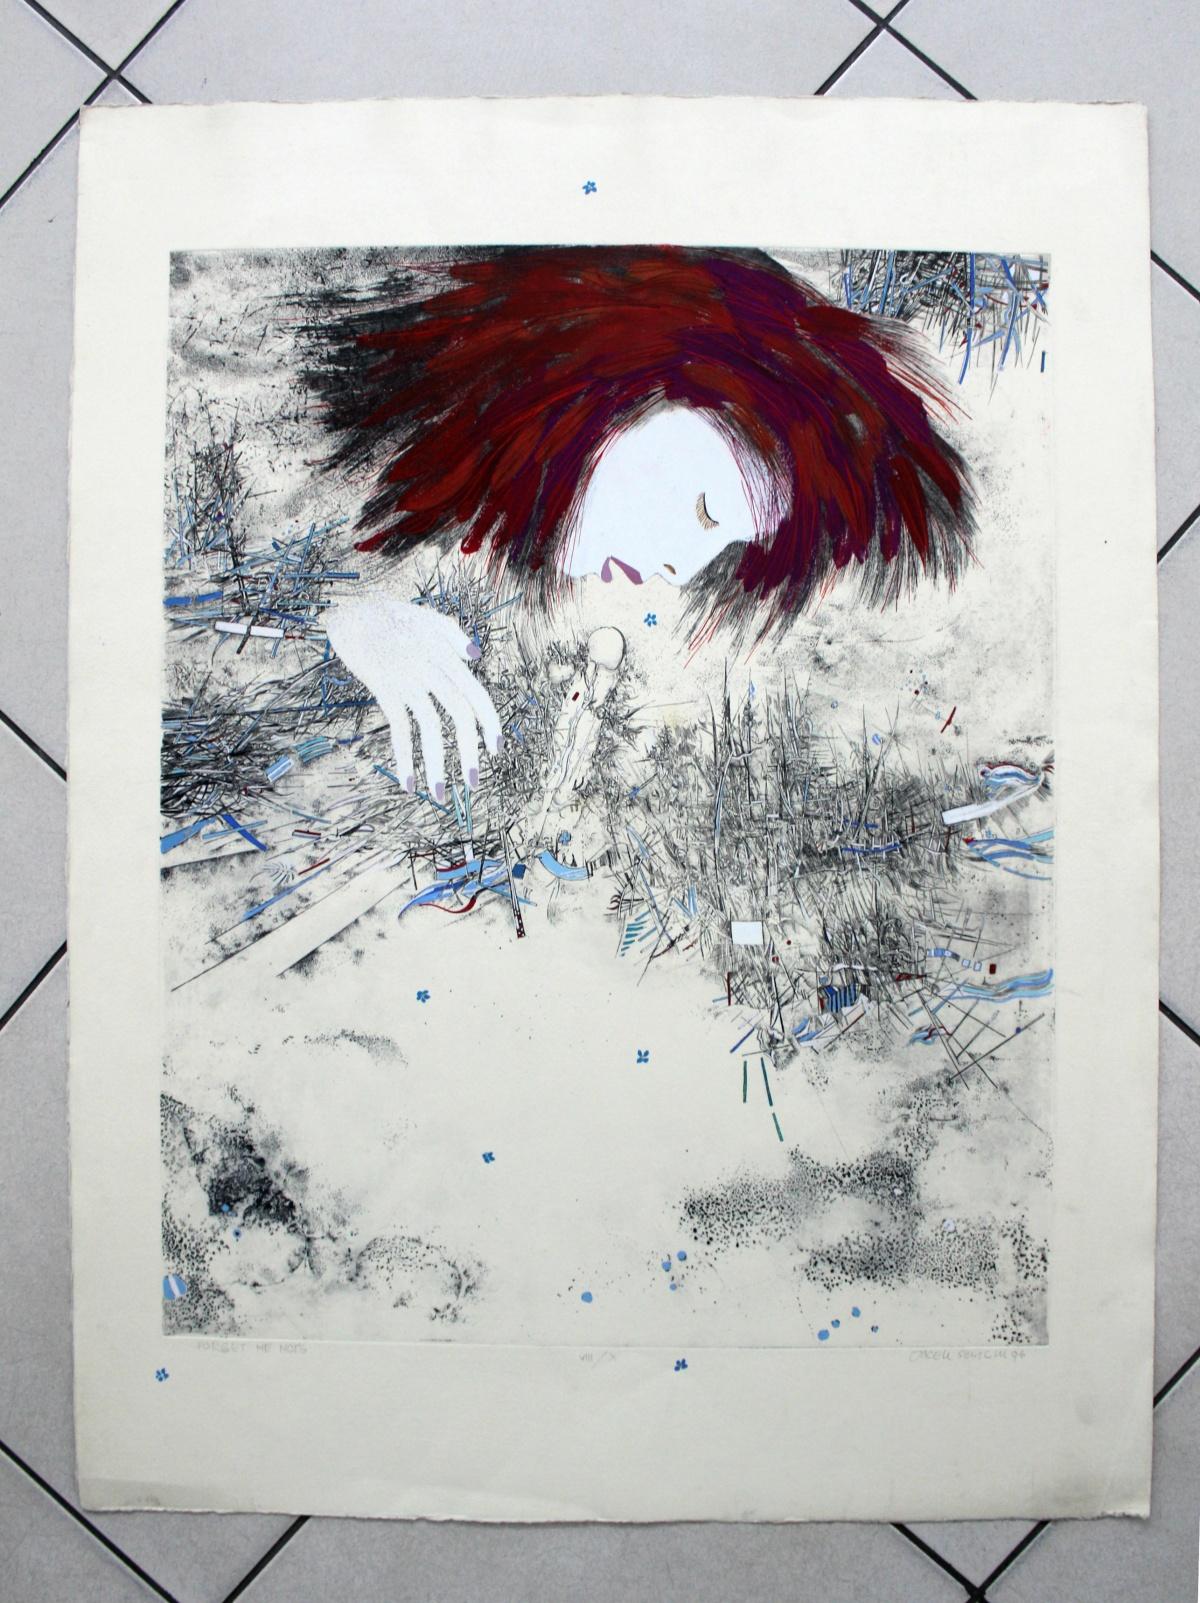 Forget me nots - XX century, Mixed media print, Figurative, Portrait, Abstract - Print by Jacek Sowicki